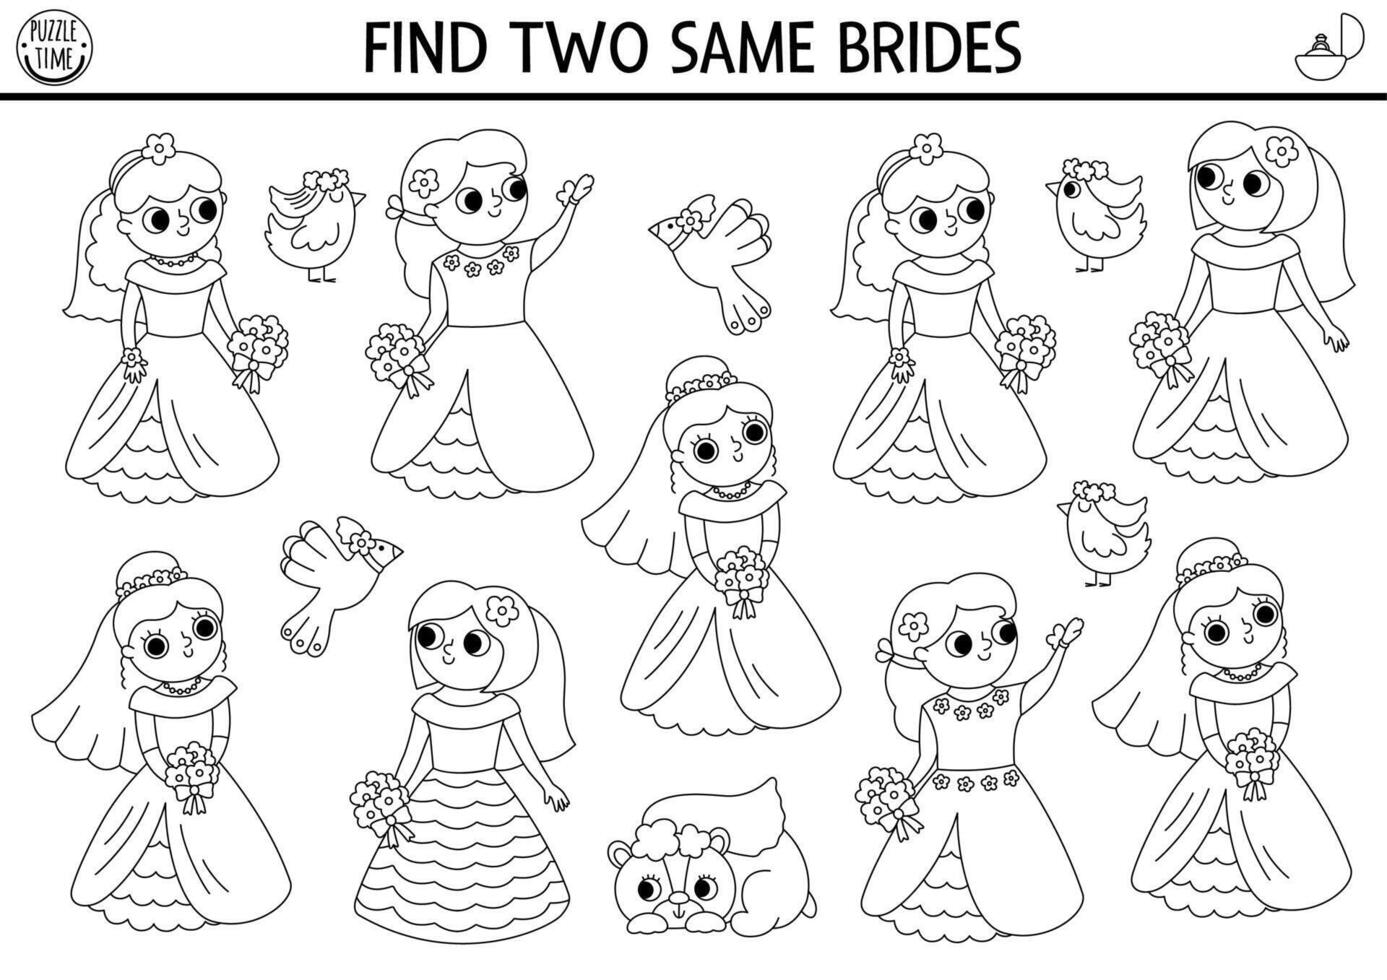 Find two same brides. Marriage ceremony black and white matching activity. Wedding educational coloring page worksheet for kids. Printable game with cute girls in white dresses, veil vector